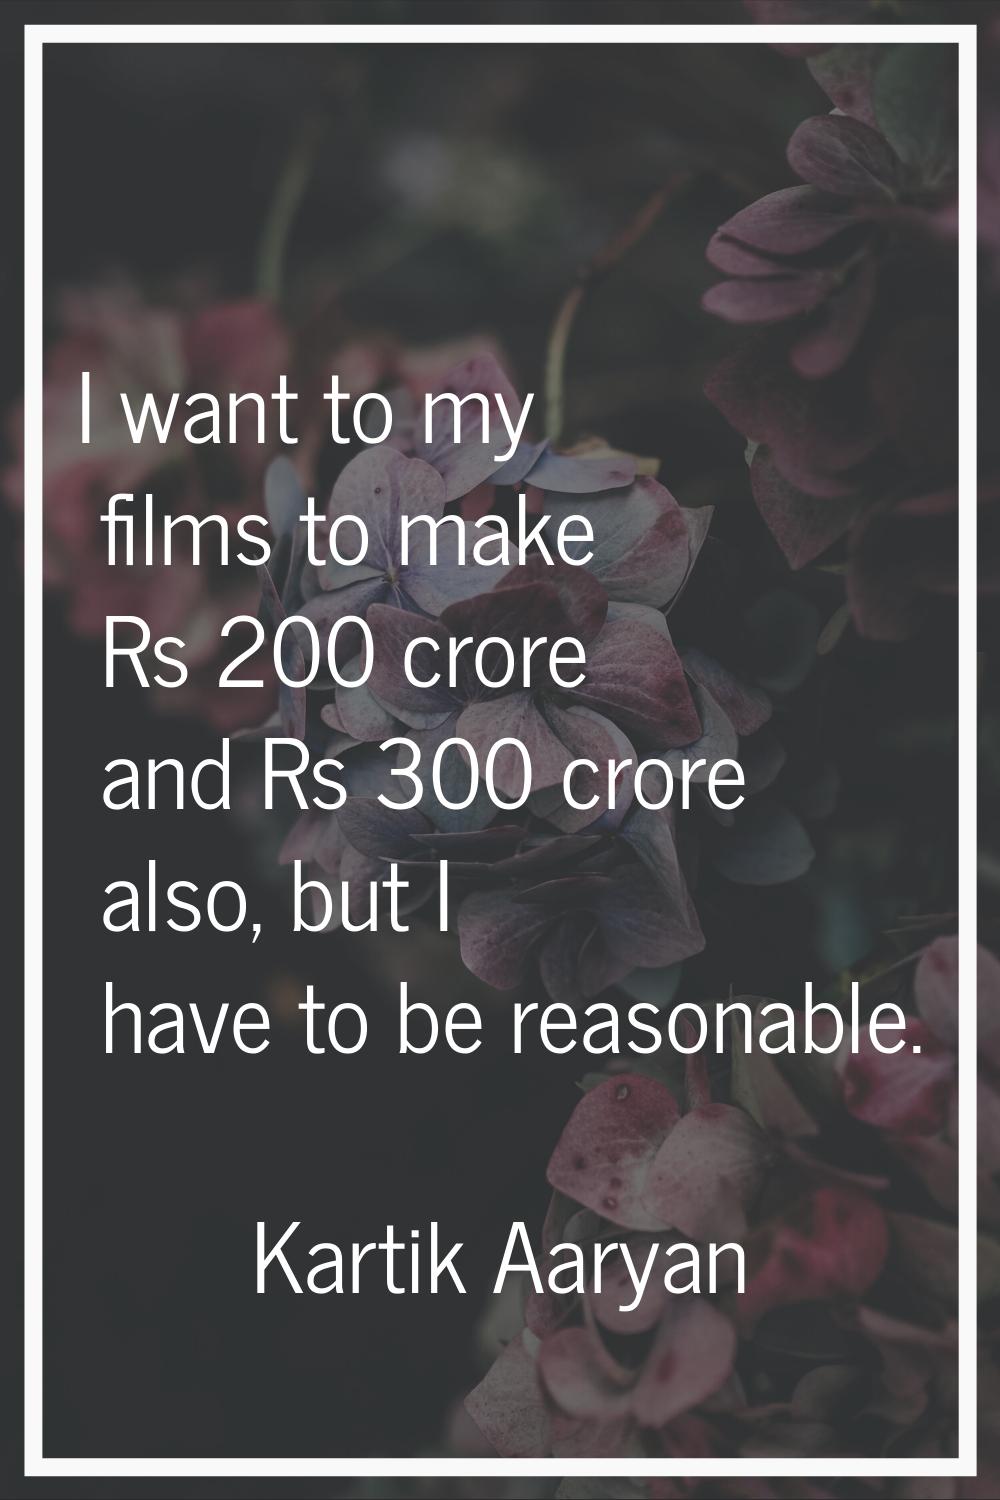 I want to my films to make Rs 200 crore and Rs 300 crore also, but I have to be reasonable.